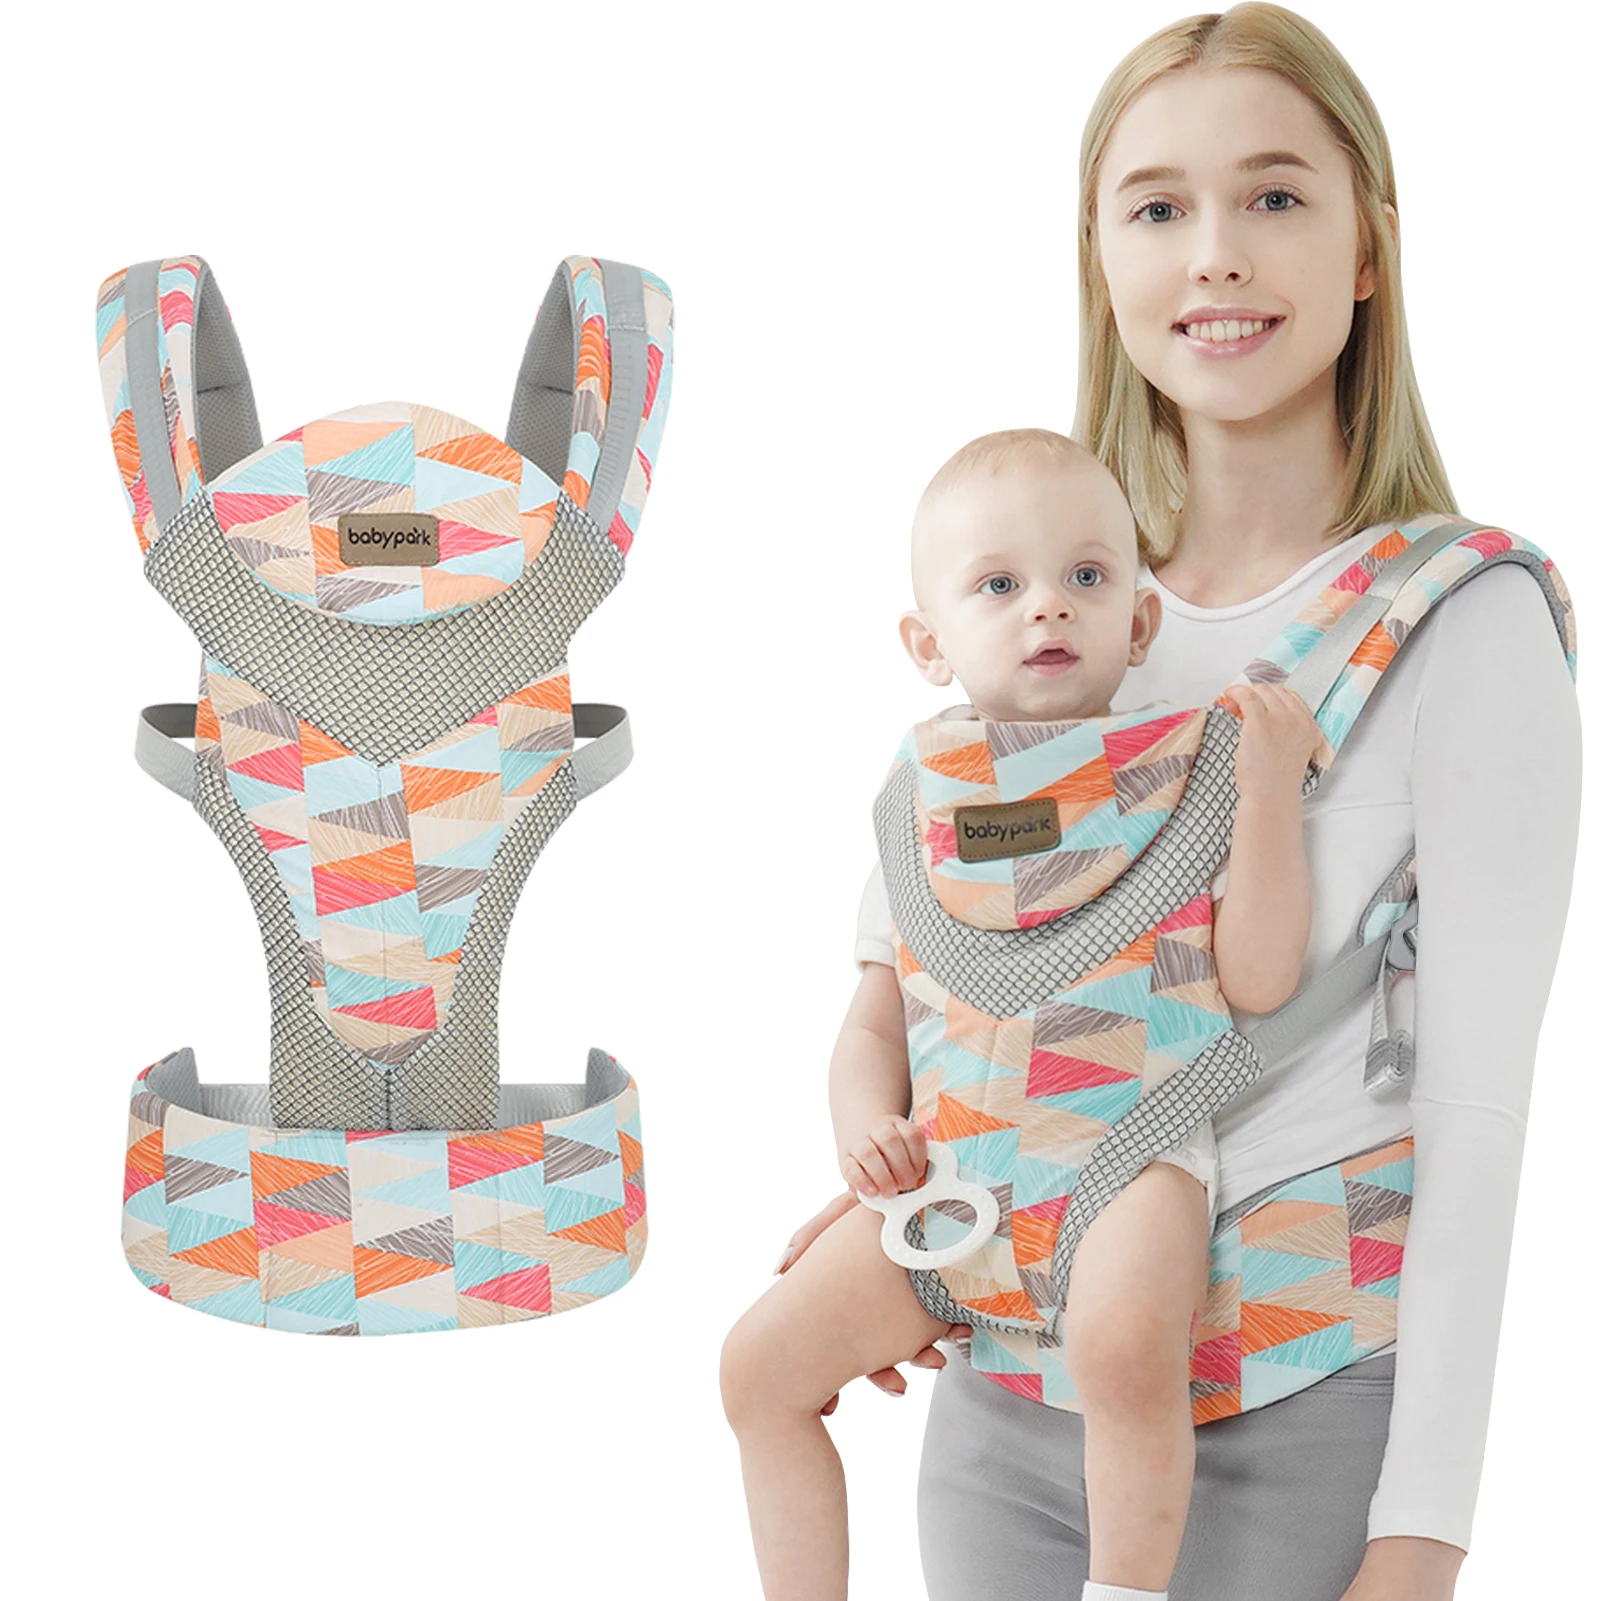 3-in-1 Baby Carrier Newborn Hip Seat Kangaroo Bag Infants Front and Back Backpack, 7 - 40 lbs, 6 - 36 Months Baby Accessories